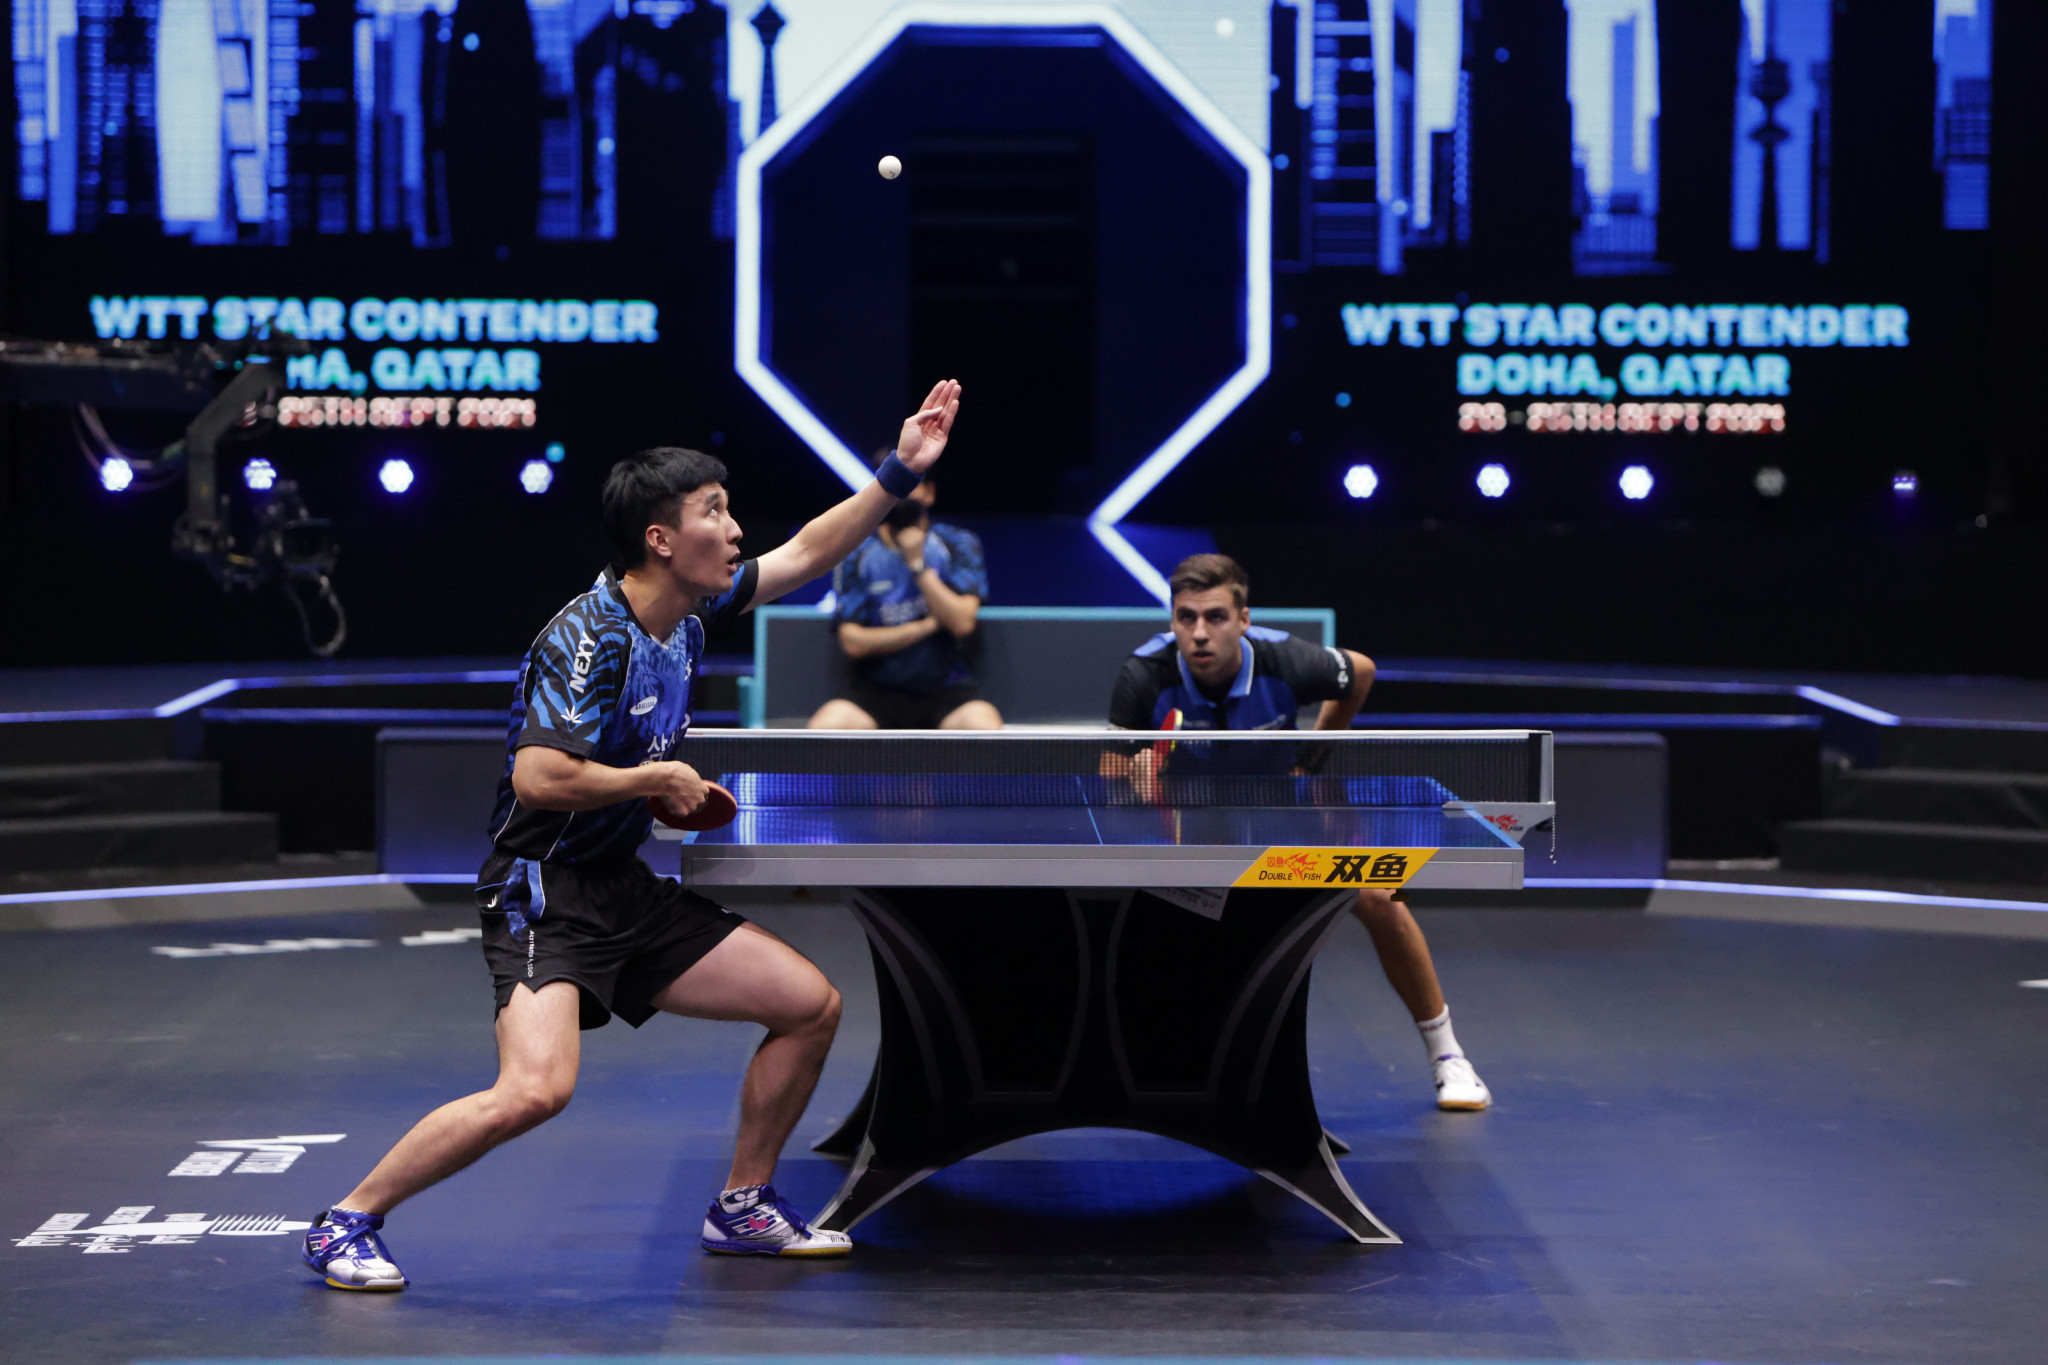 World Table Tennis to increase event portfolio in 2022